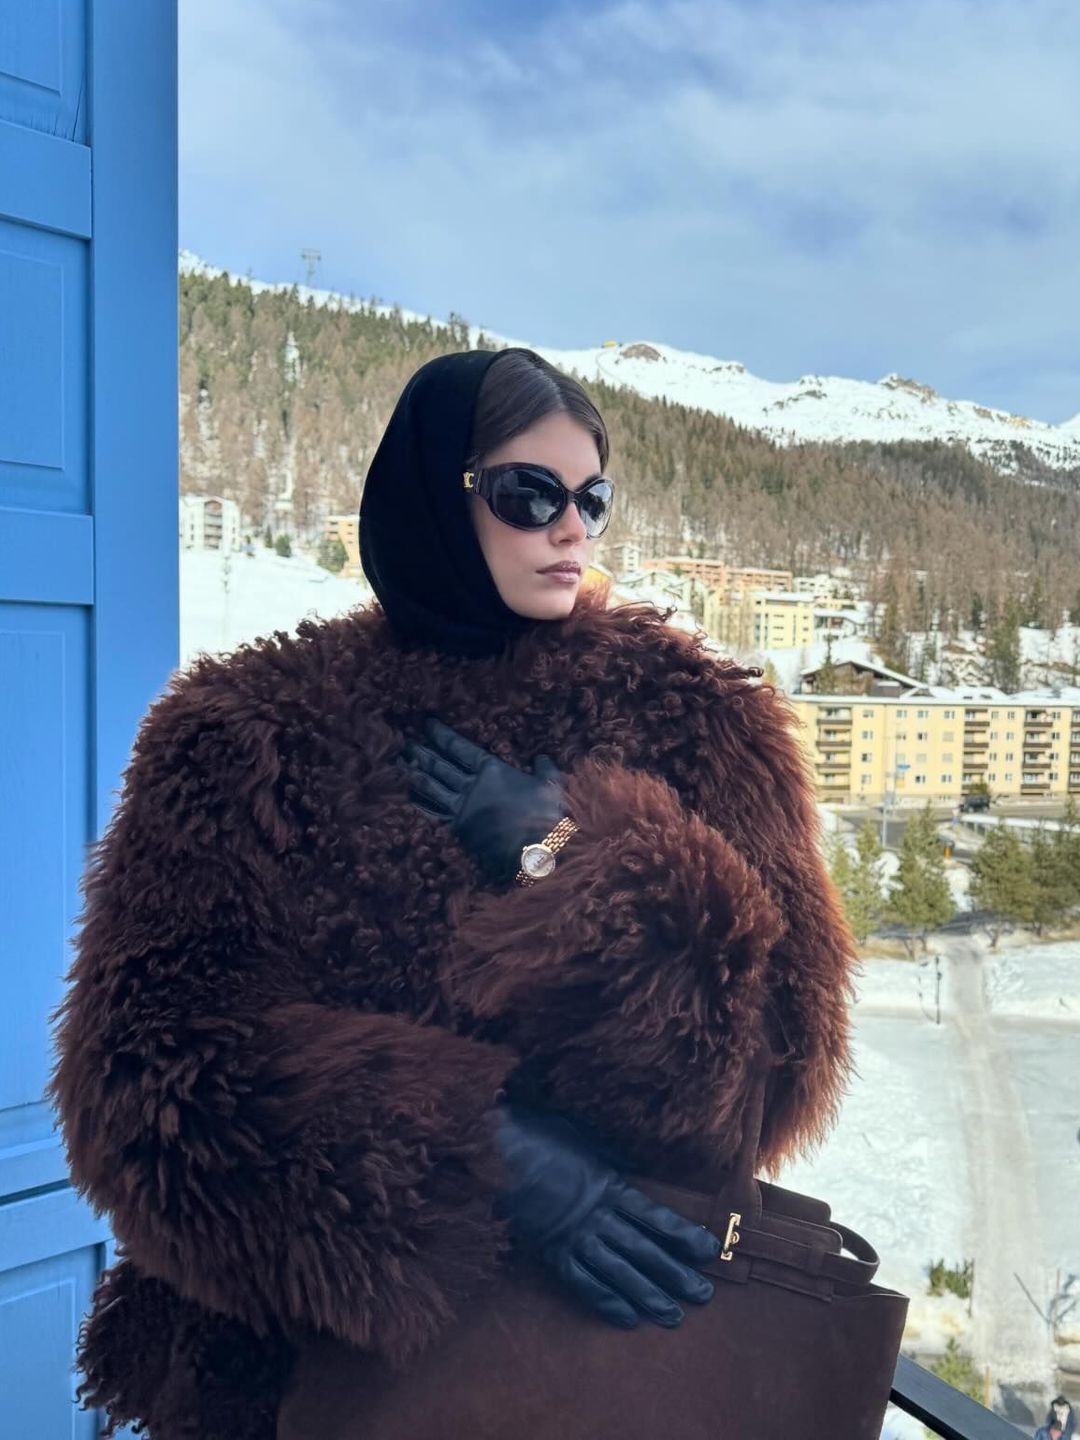 Model Kaia Gerber poses in a brown fur coat, sunglasses and leather gloves while in St Moritz